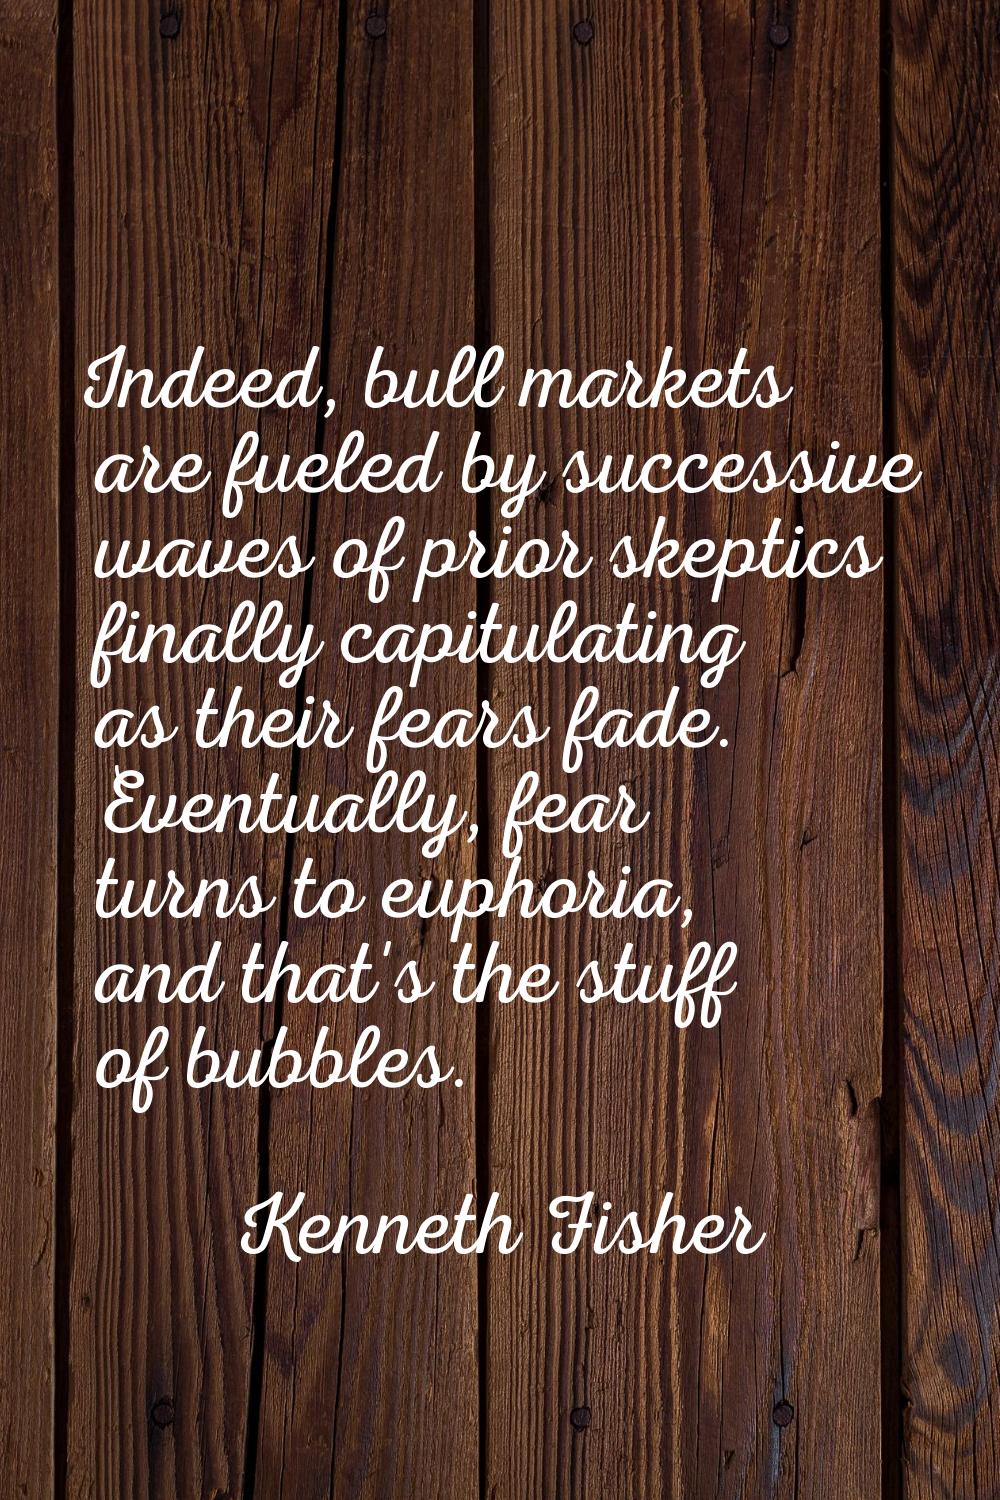 Indeed, bull markets are fueled by successive waves of prior skeptics finally capitulating as their